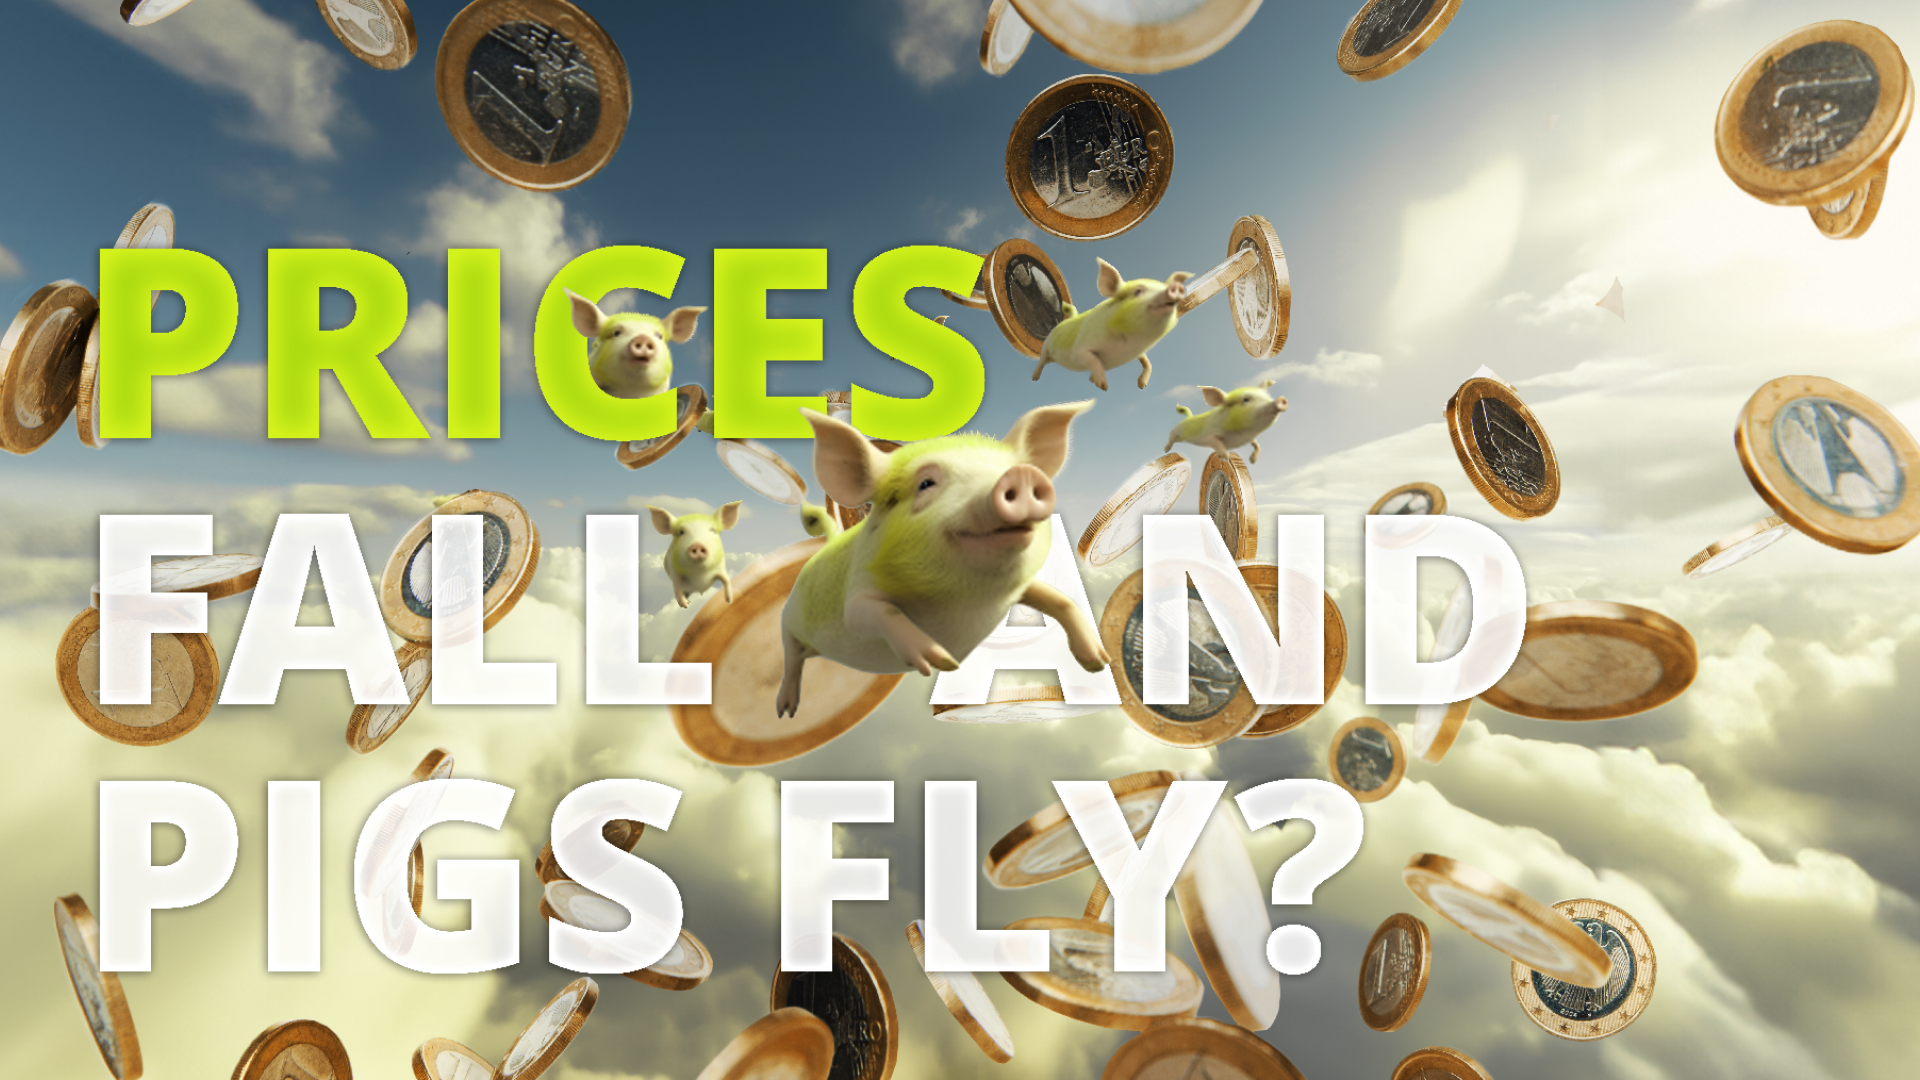 [Translate to Englisch:] Prices fall and pigs fly